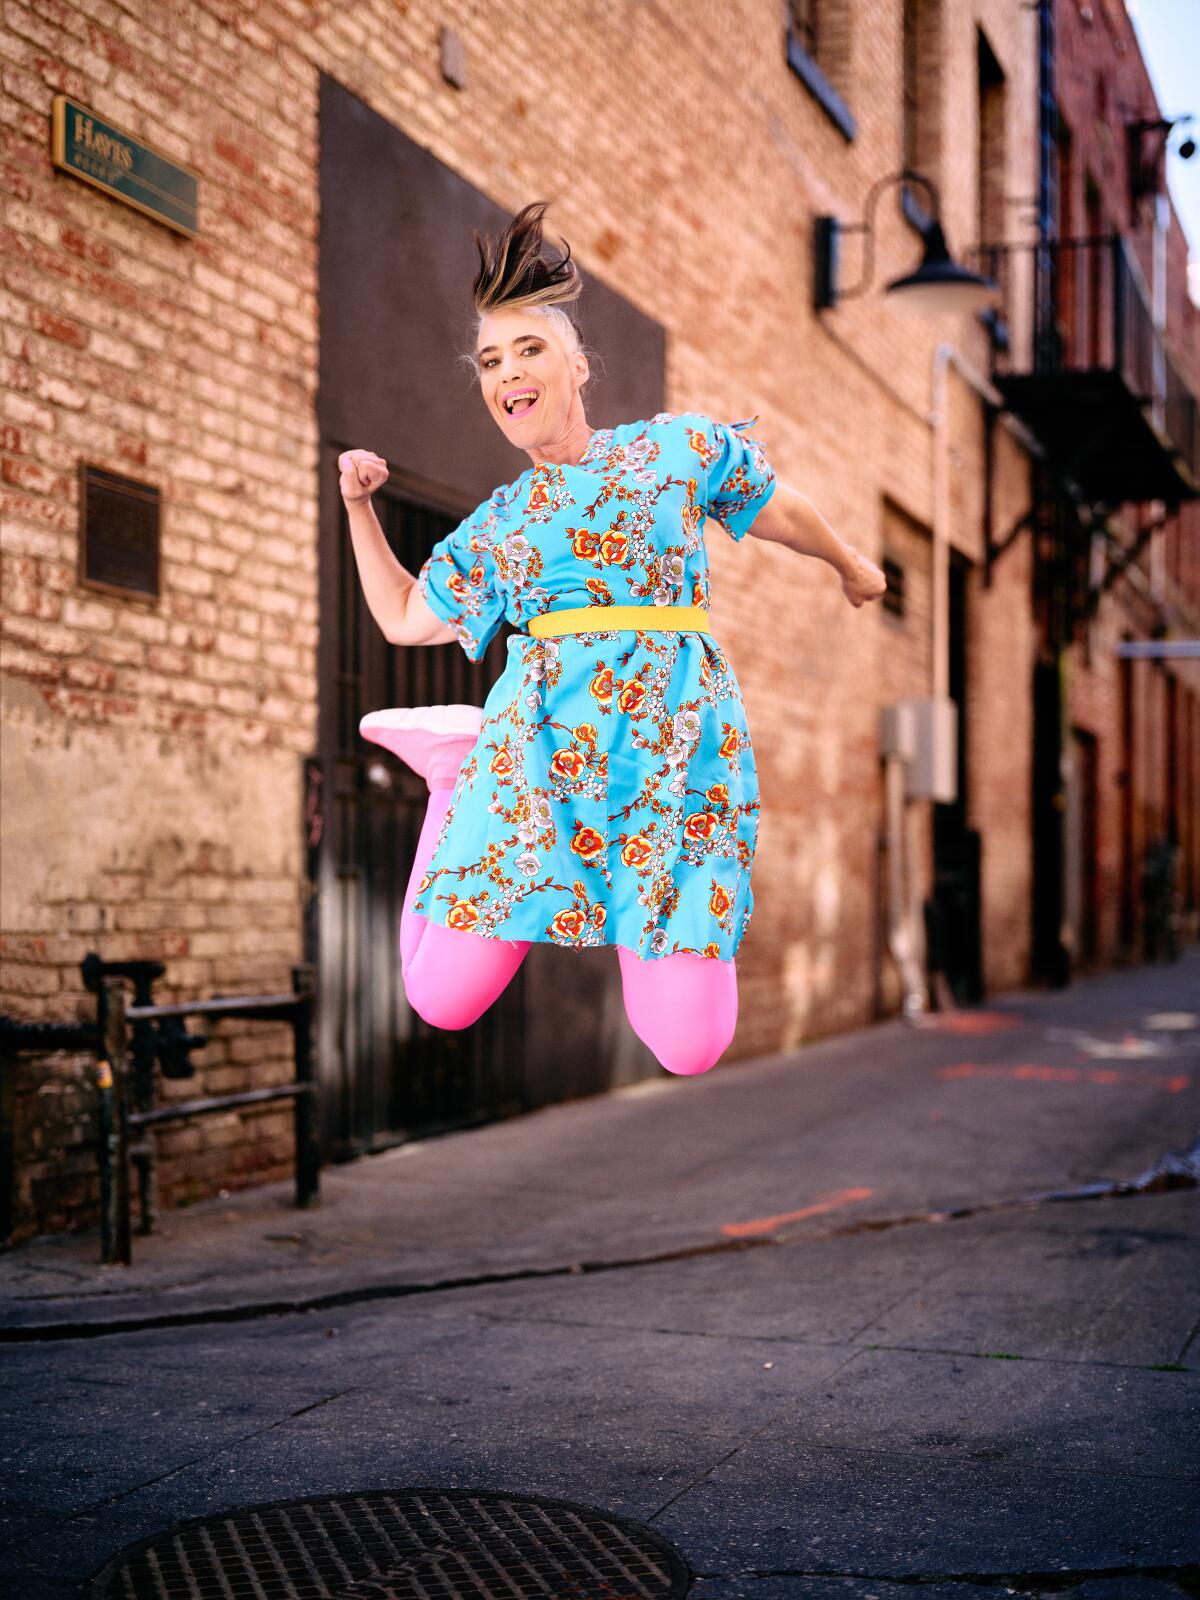 Kathleen Hanna, in pink tights and a blue floral dress, jumps mid-air.